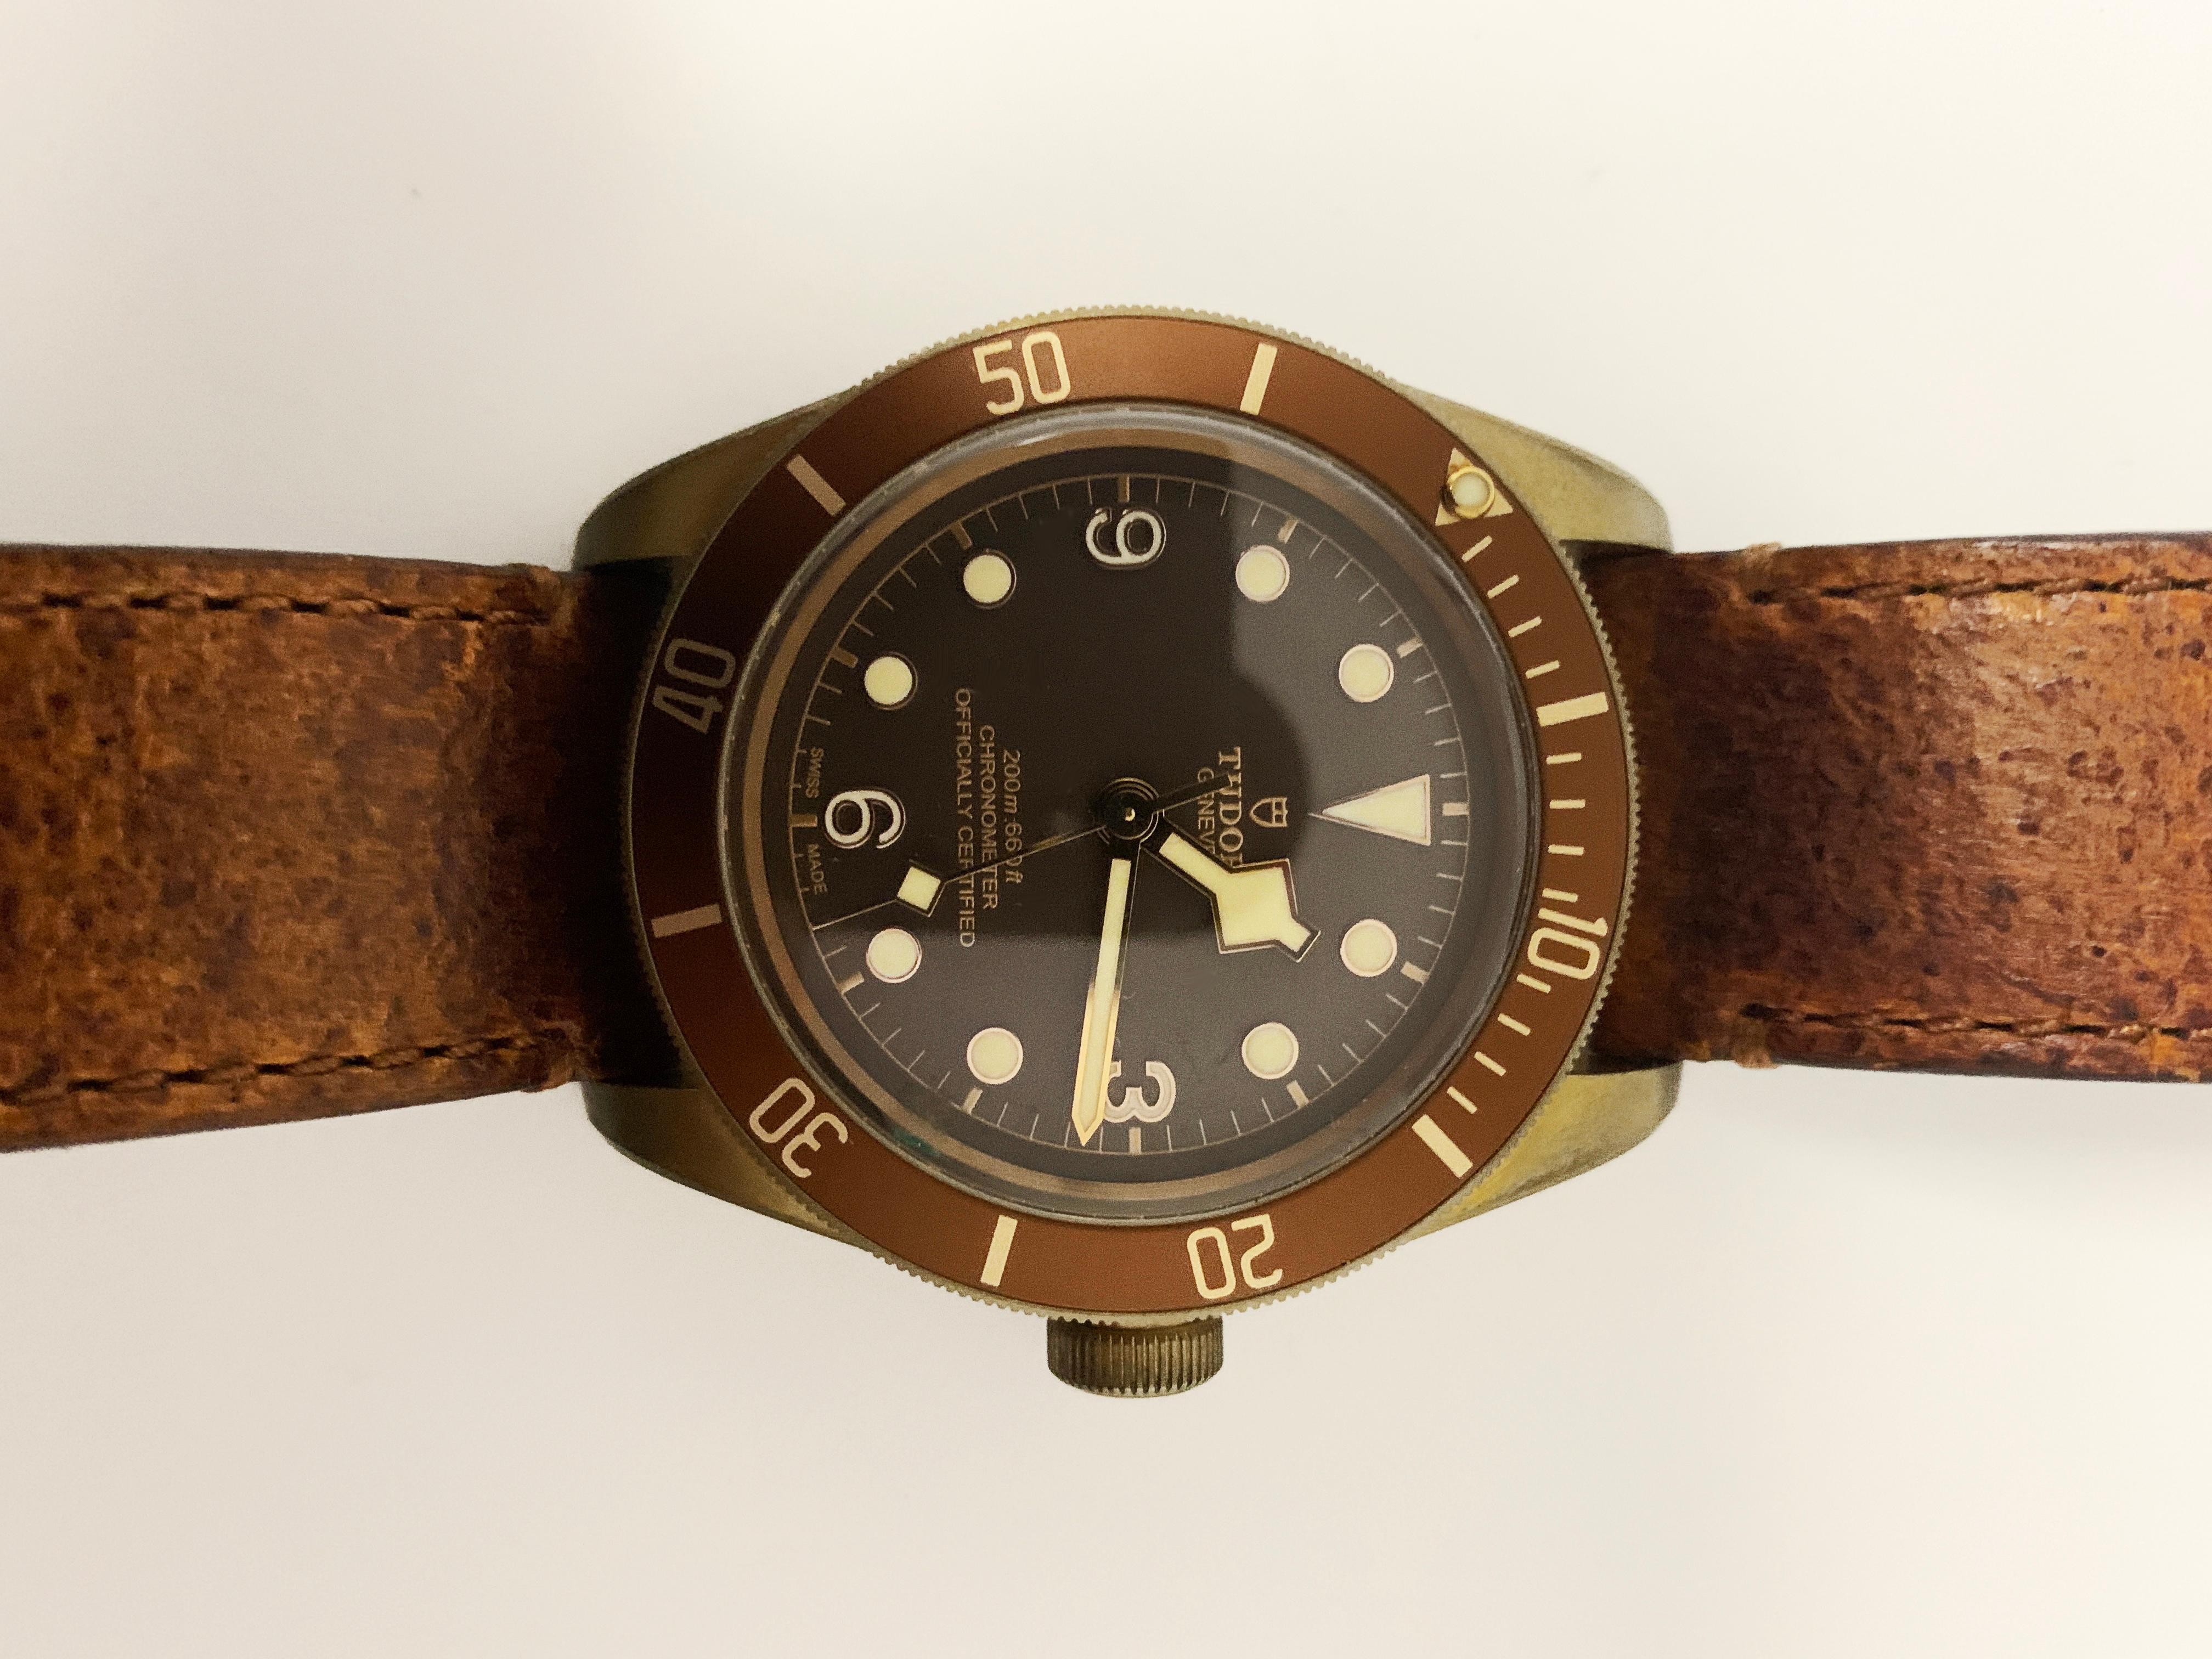 tudor Black Bay 
limited edition bronze
Ref. 79250BM
 Around 2019
Bronze case
Mechanical self-winding movement
Leather strap and buckle signed in bronze
Original box and paper
new from stock
3600 euros